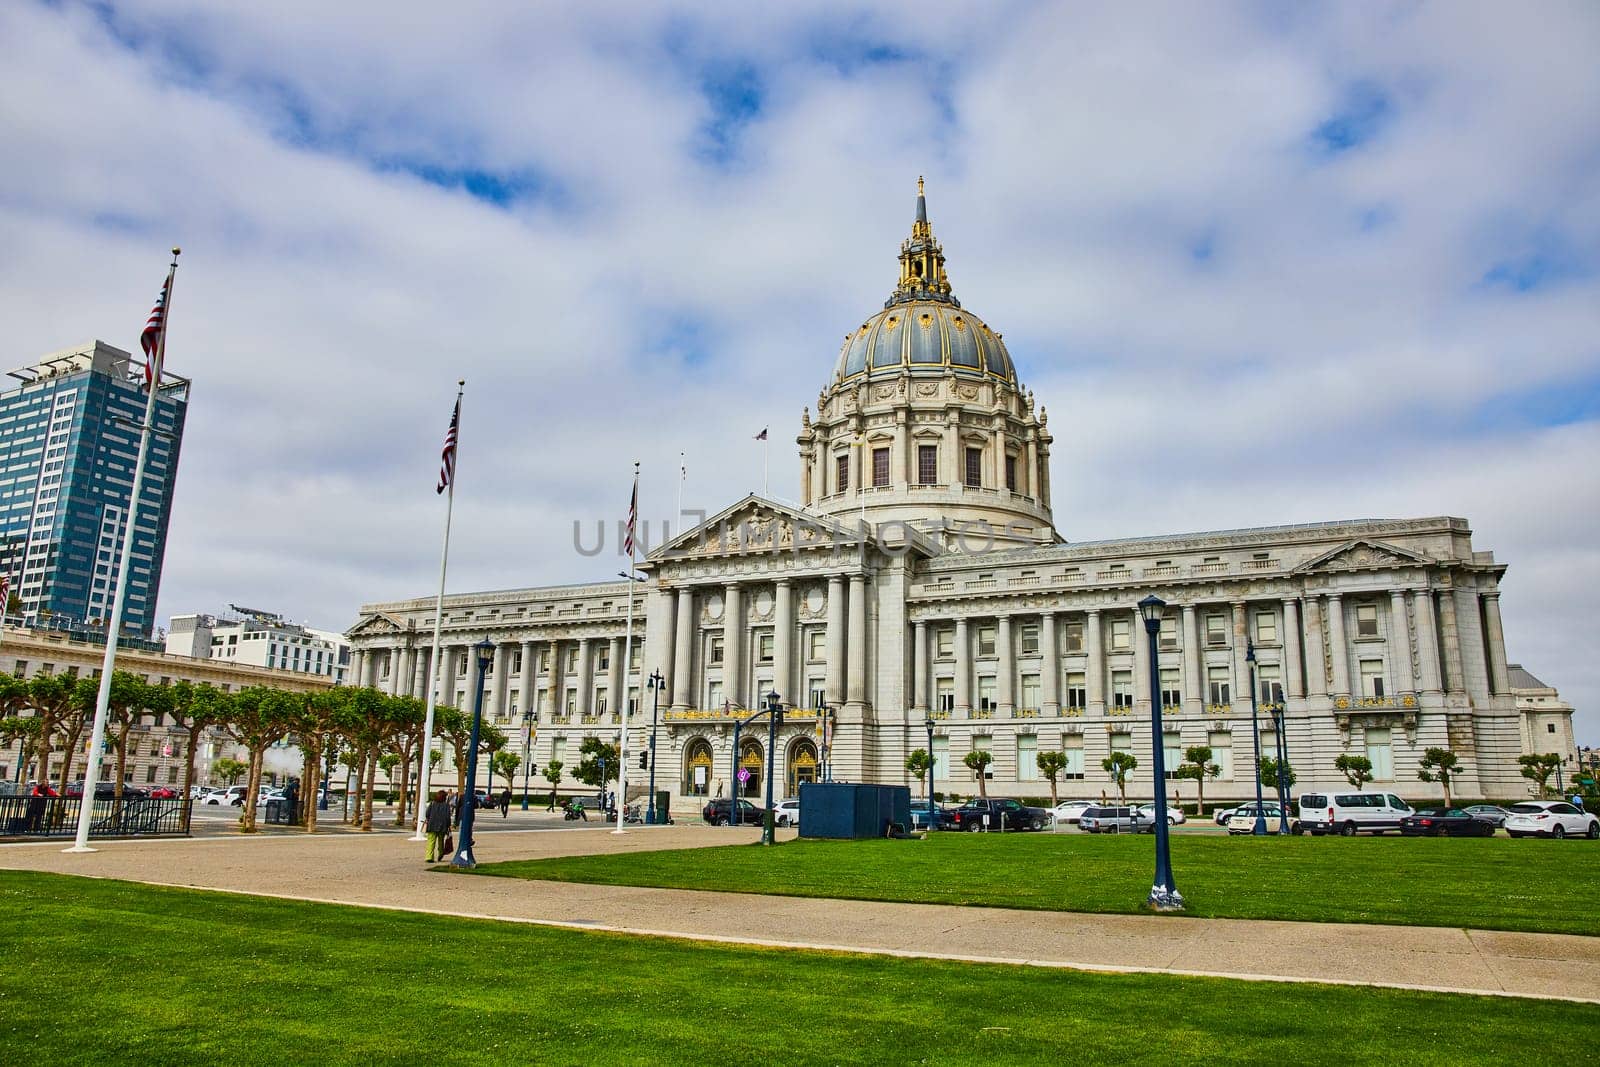 Image of San Francisco city hall with pedestrians on sidewalk and cloudy blue sky overhead